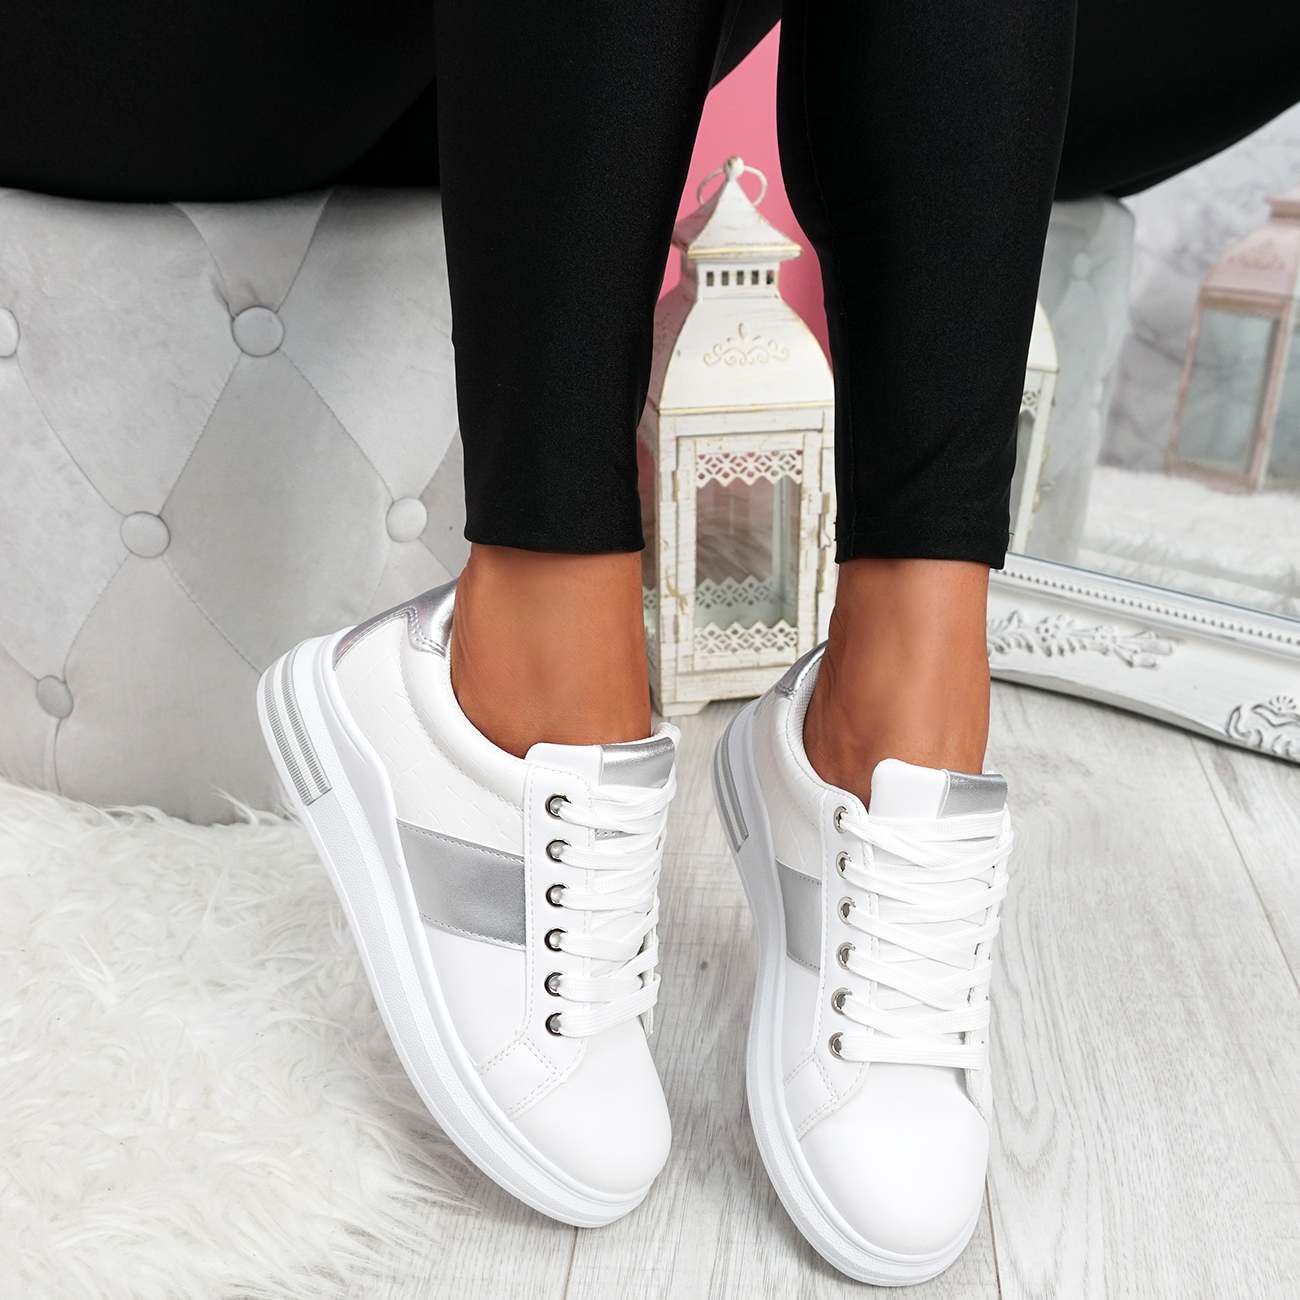 WOMENS LADIES LACE UP PLATFORM TRAINERS CASUAL WOMEN SUMMER SNEAKERS ...